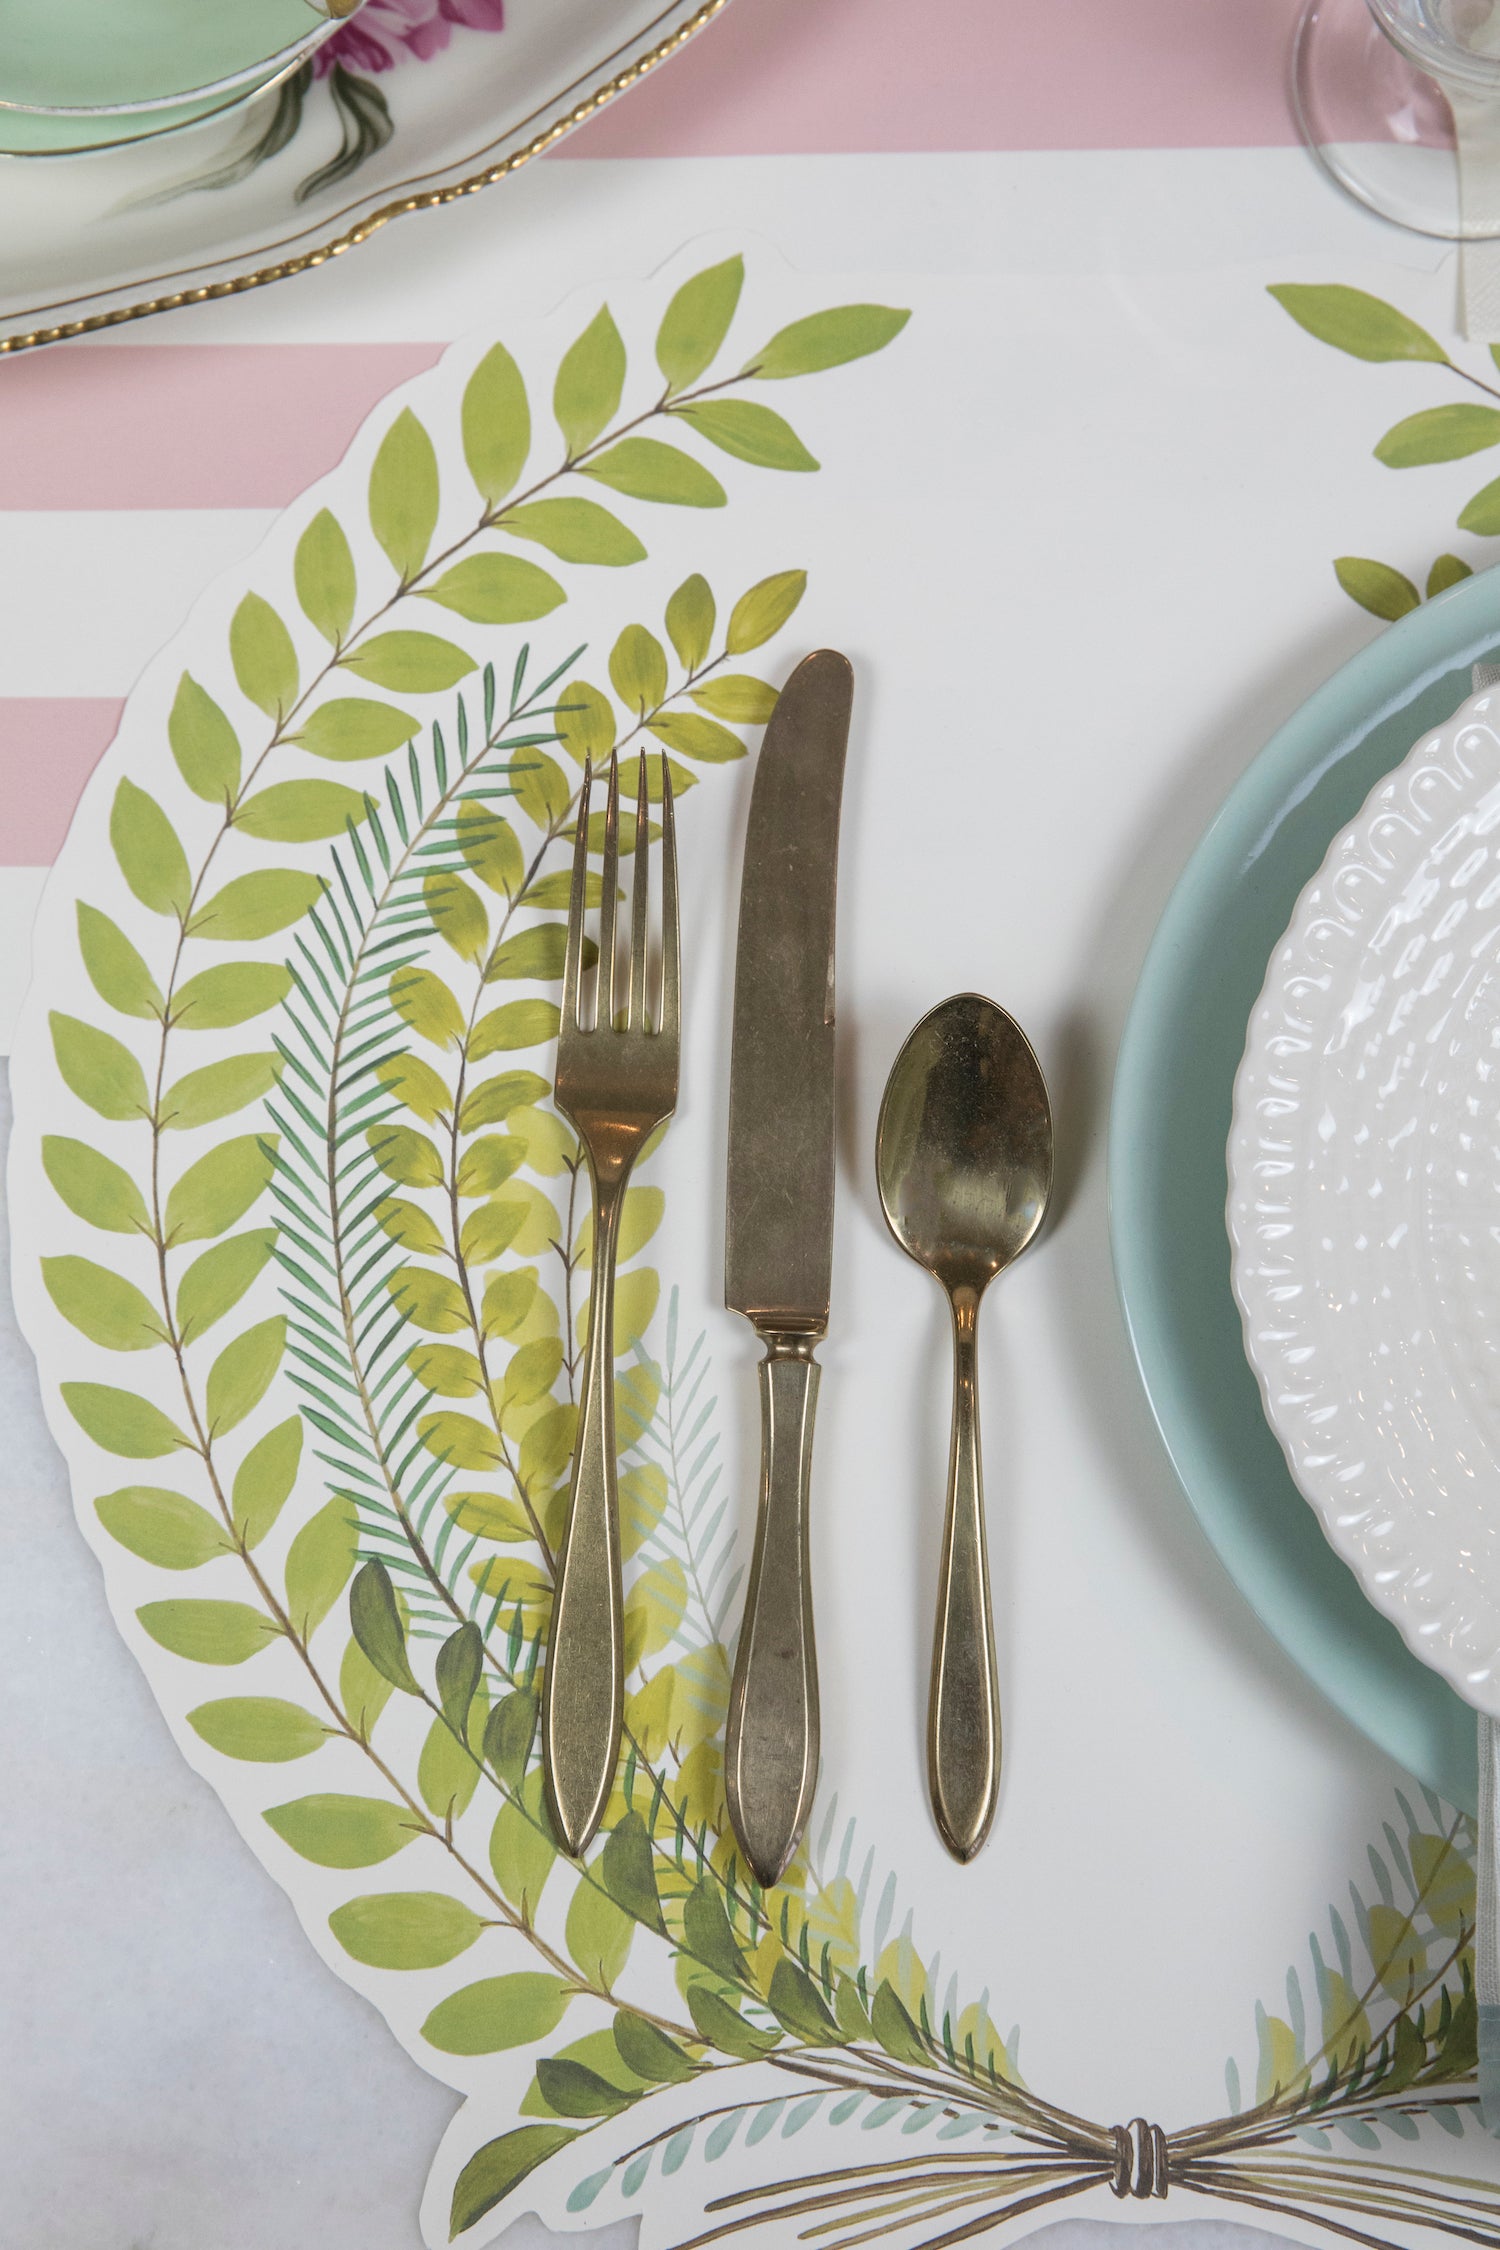 Close-up of the Die-cut Seedling Wreath Placemat under an elegant springtime place setting, showing the leafy artwork in detail.